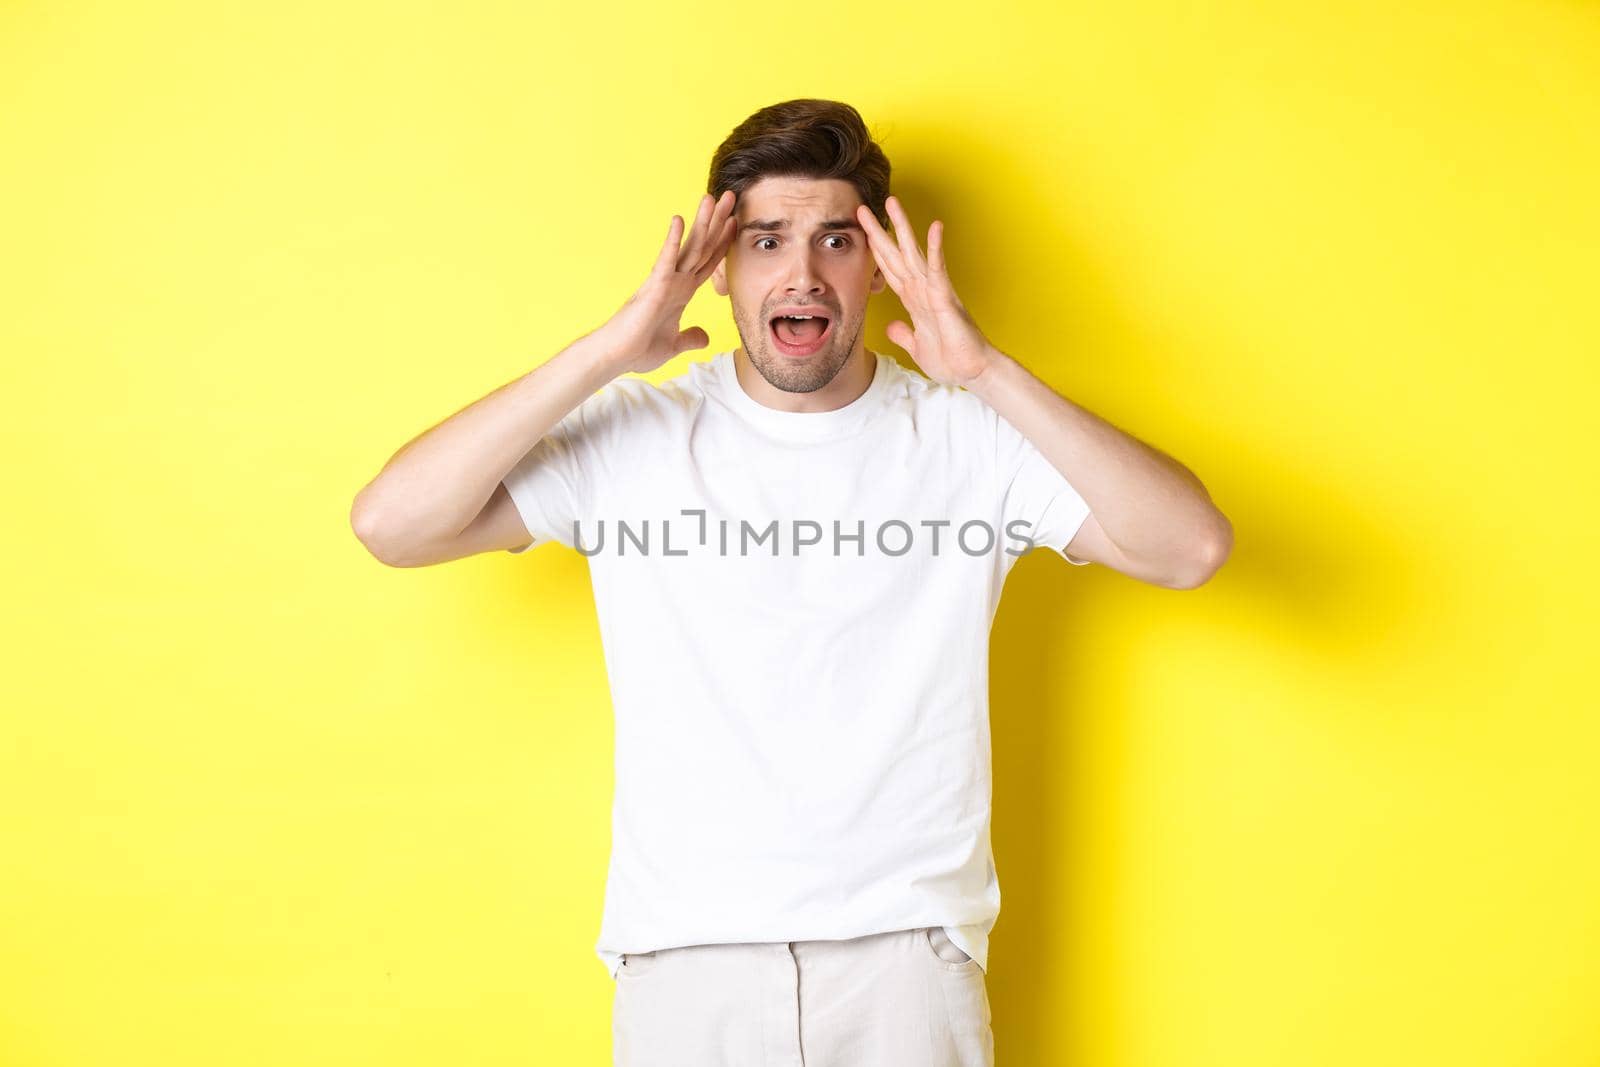 Frustrated guy looking shocked, panicking and holding hands on head, standing against yellow background.